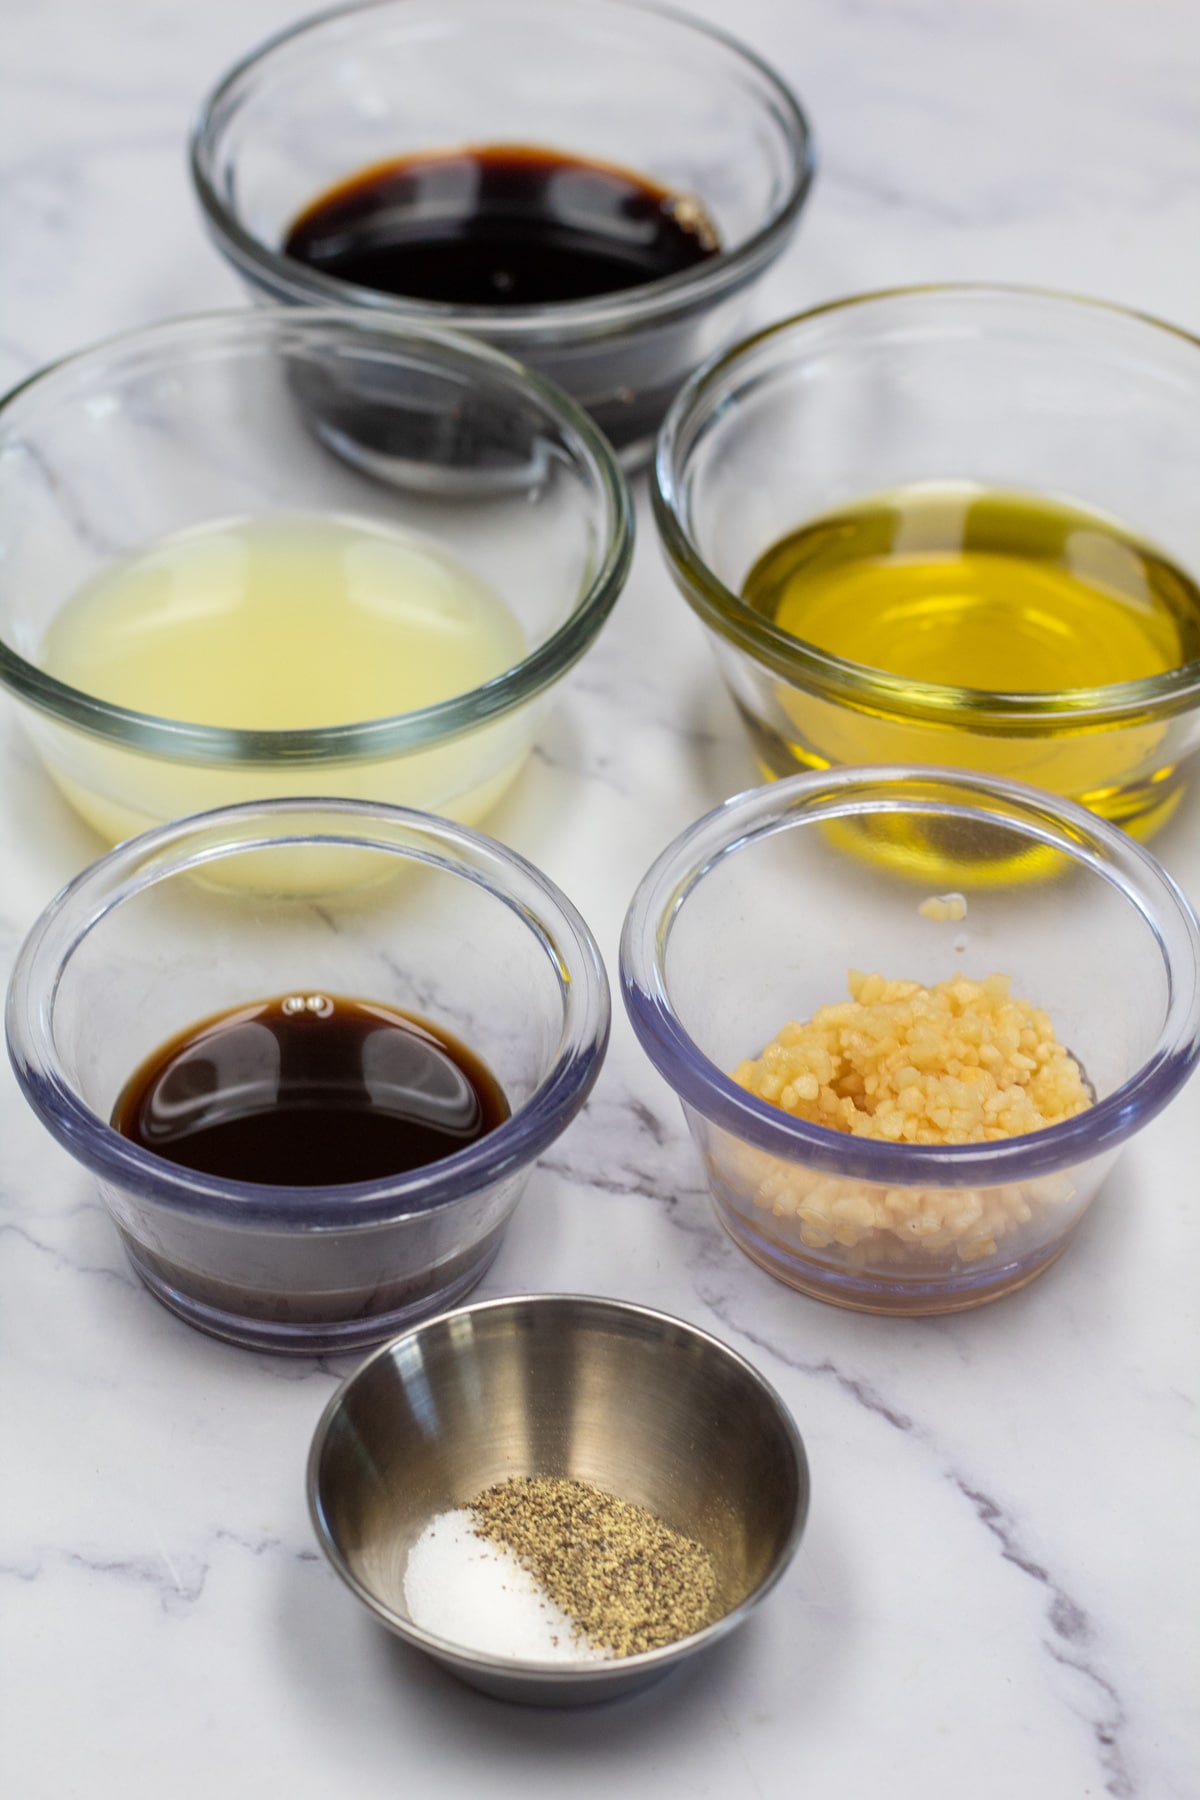 The best steak marinade ingredients measured out and ready to mix.